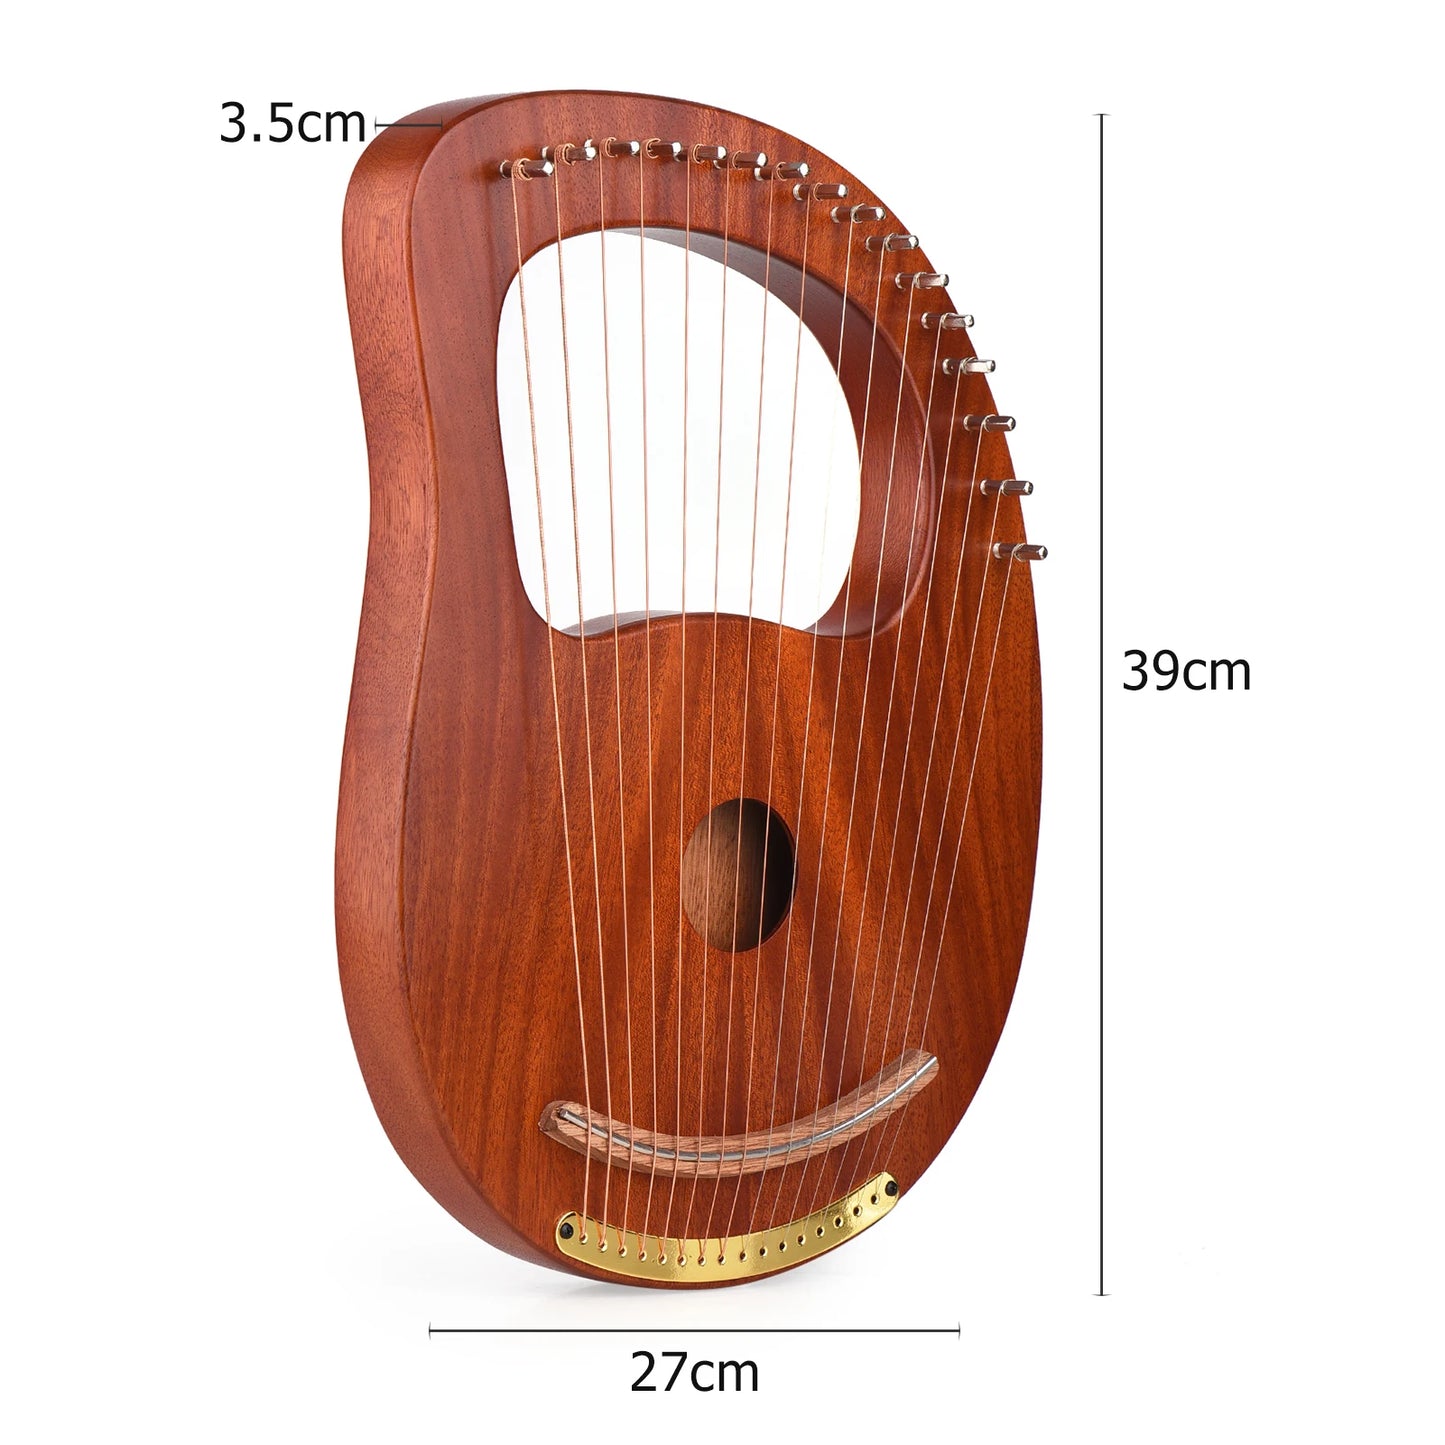 Walter.t WH-16 16-String Wooden Lyre Harp Metal Strings Solid Wood